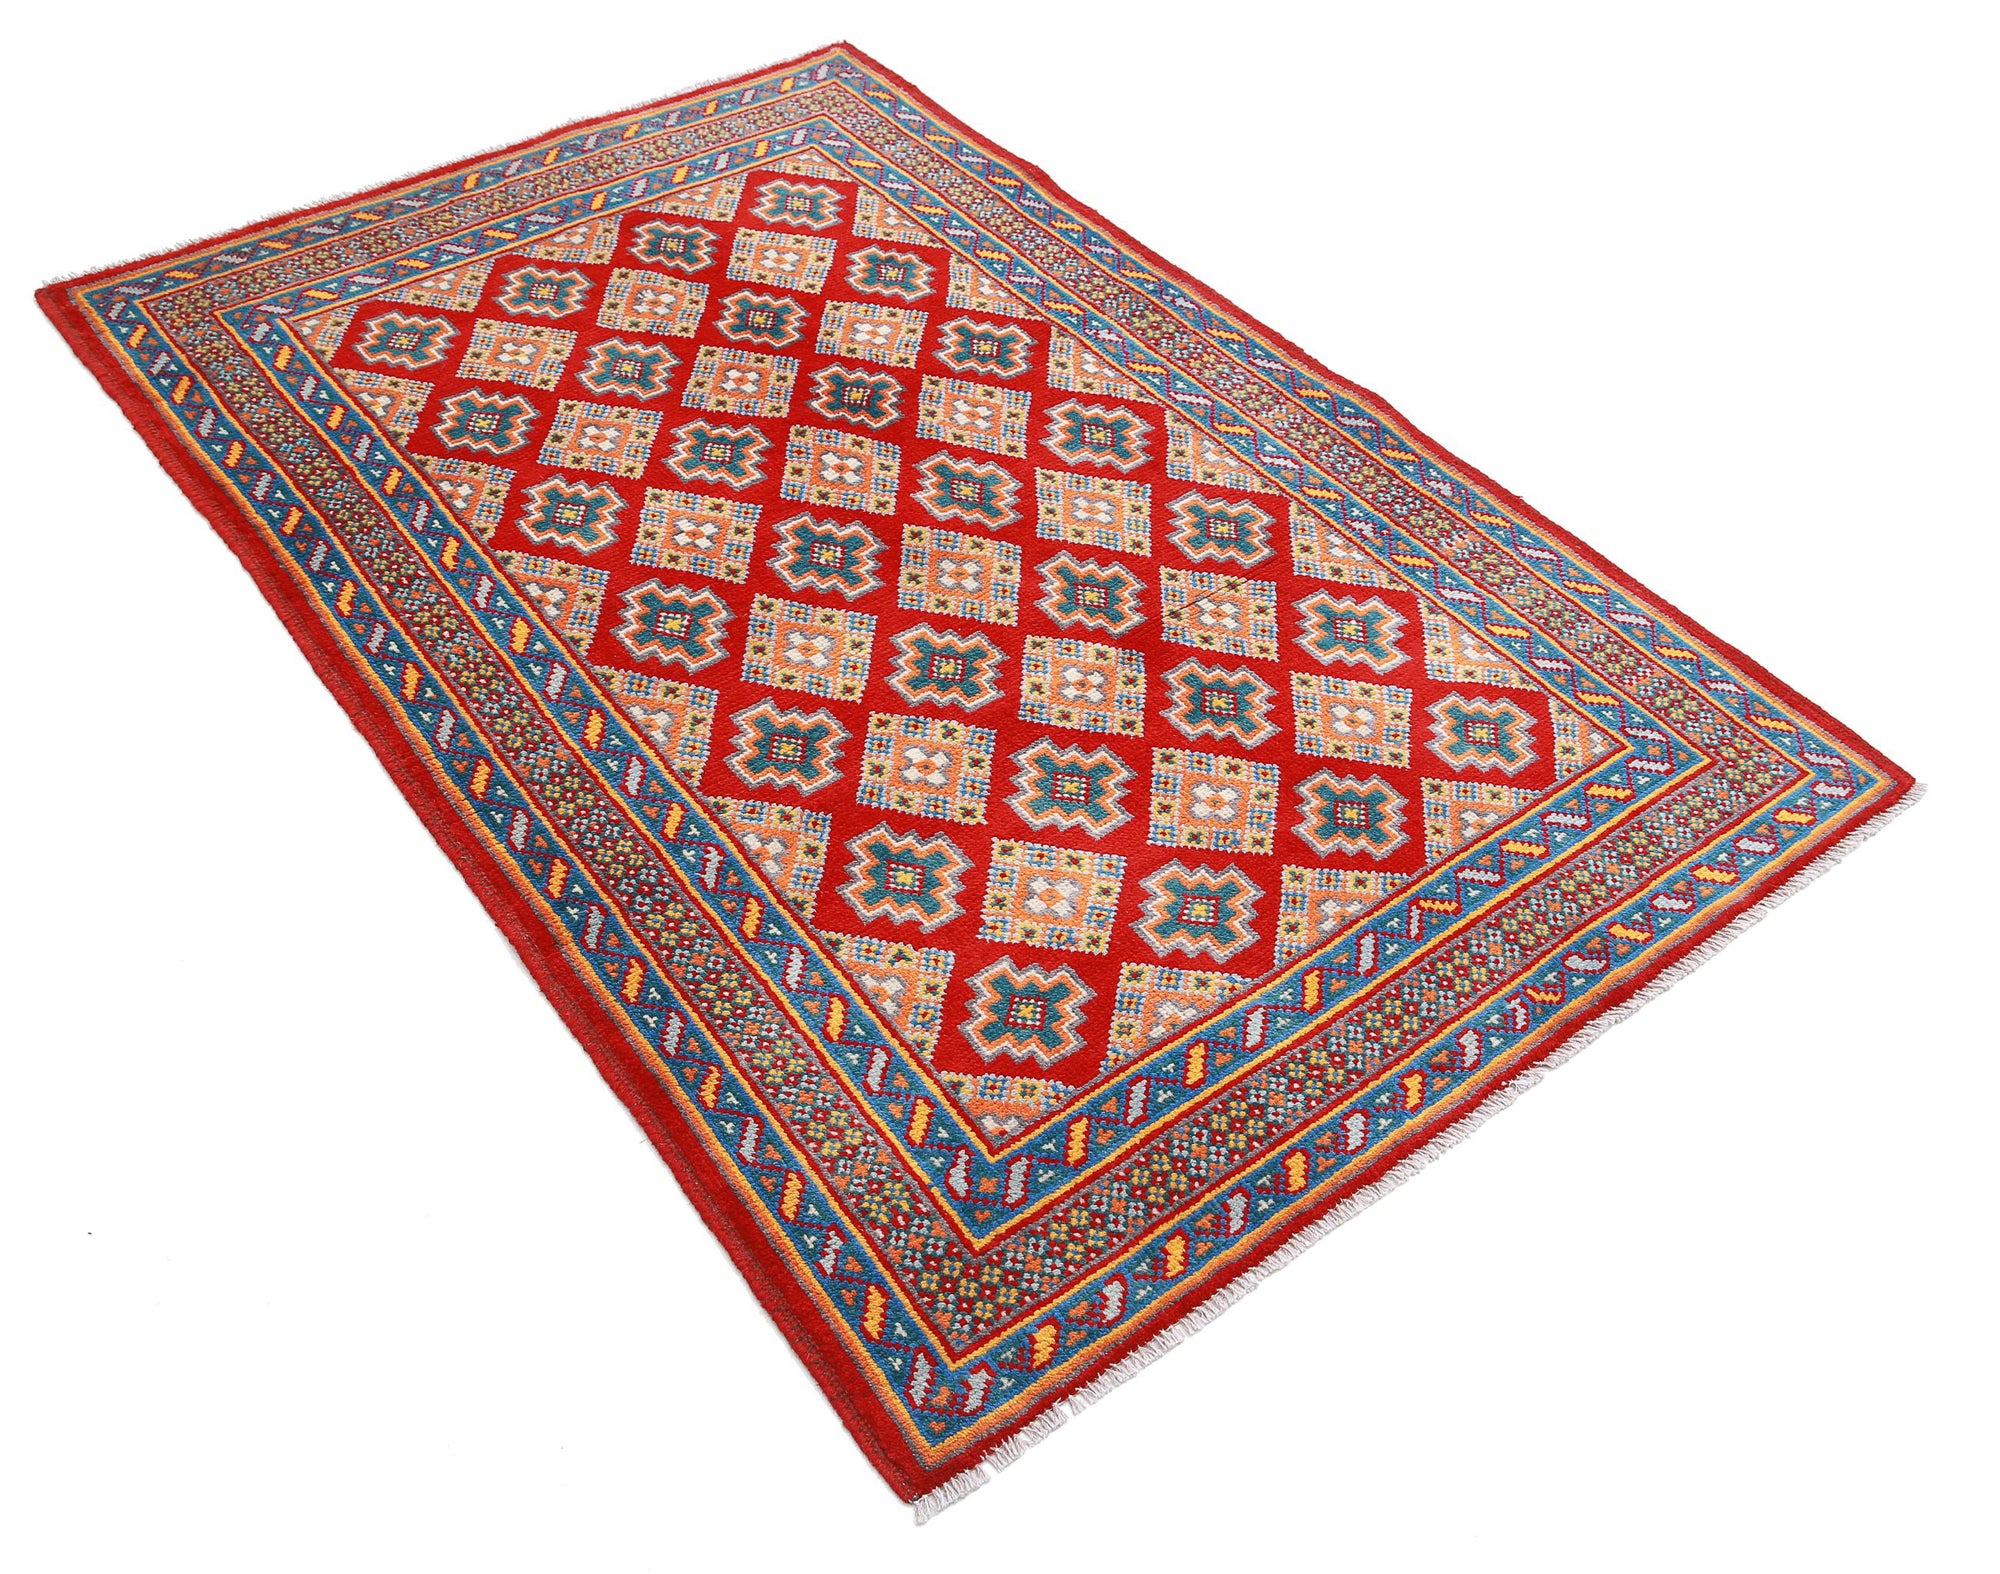 Revival-hand-knotted-qarghani-wool-rug-5014214-1.jpg